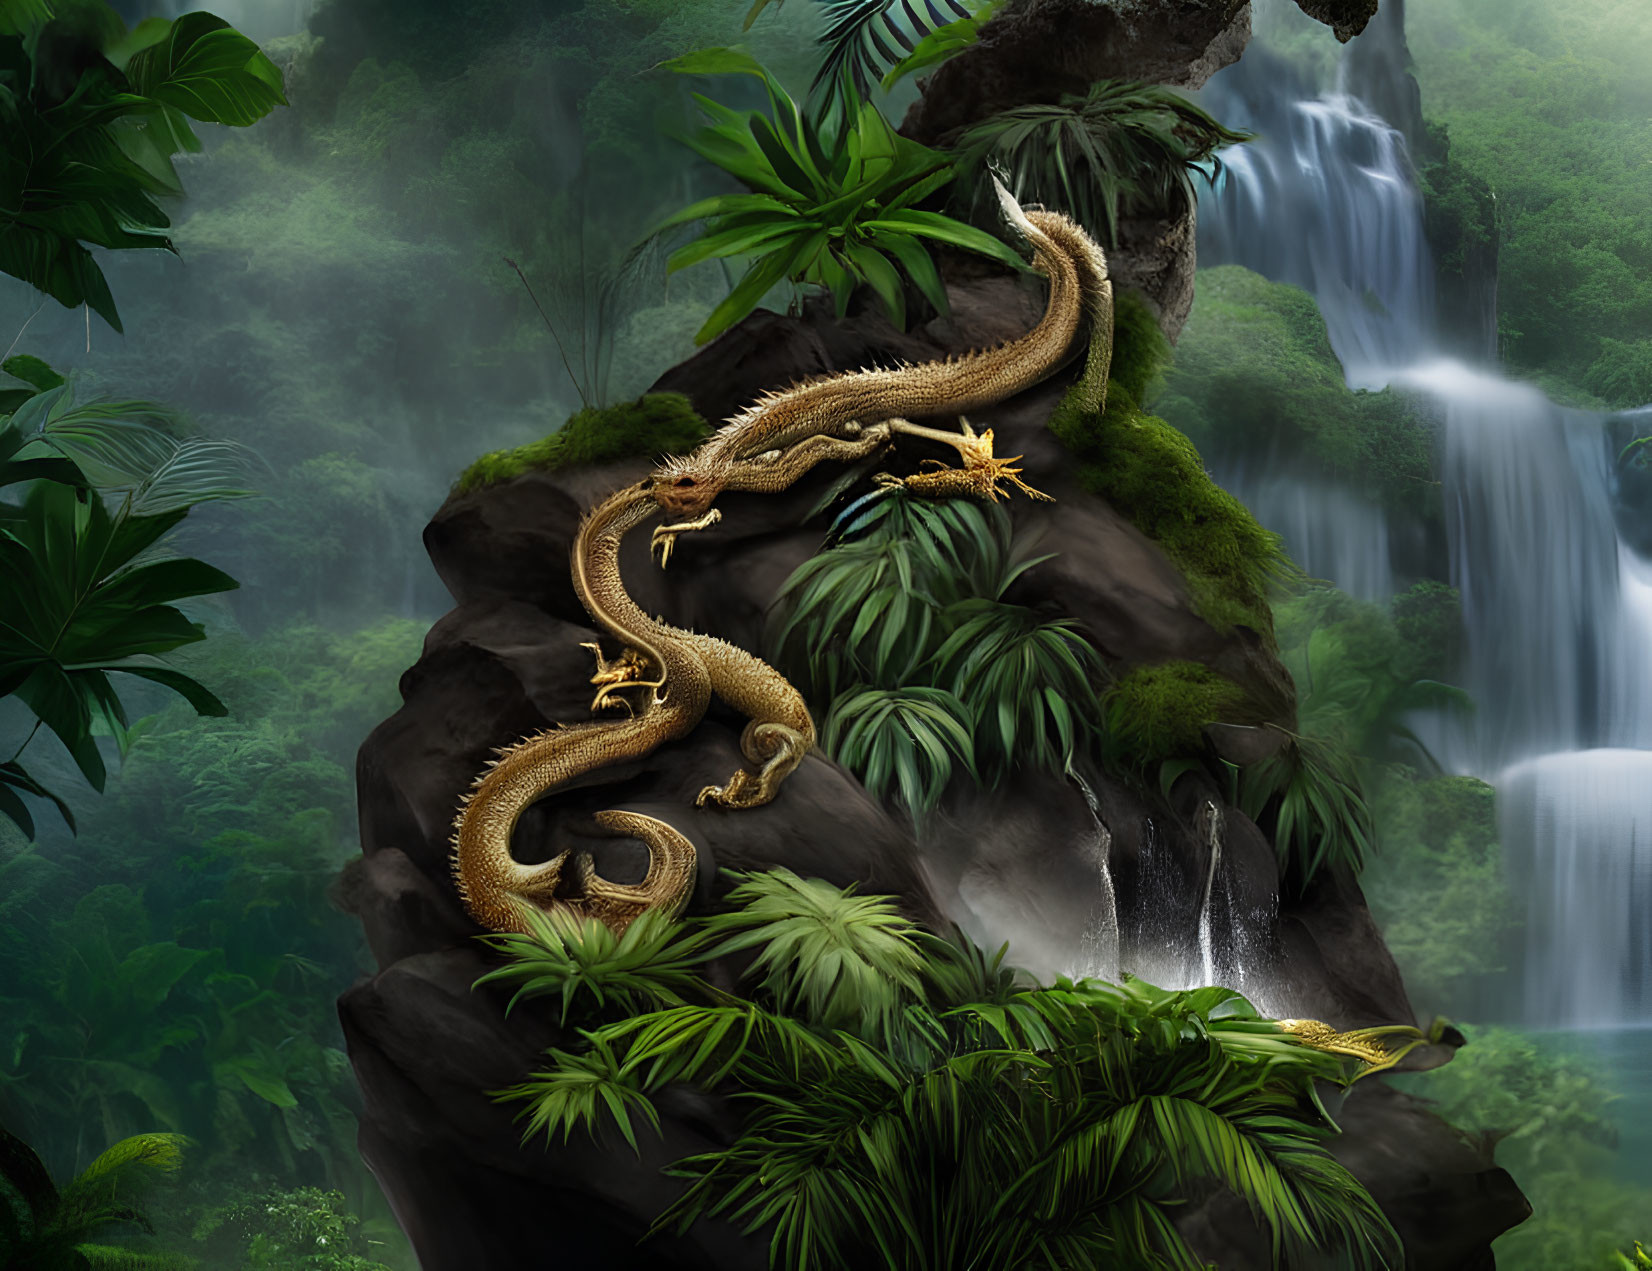 Golden dragon coiled on rocky outcrop in lush jungle with waterfalls